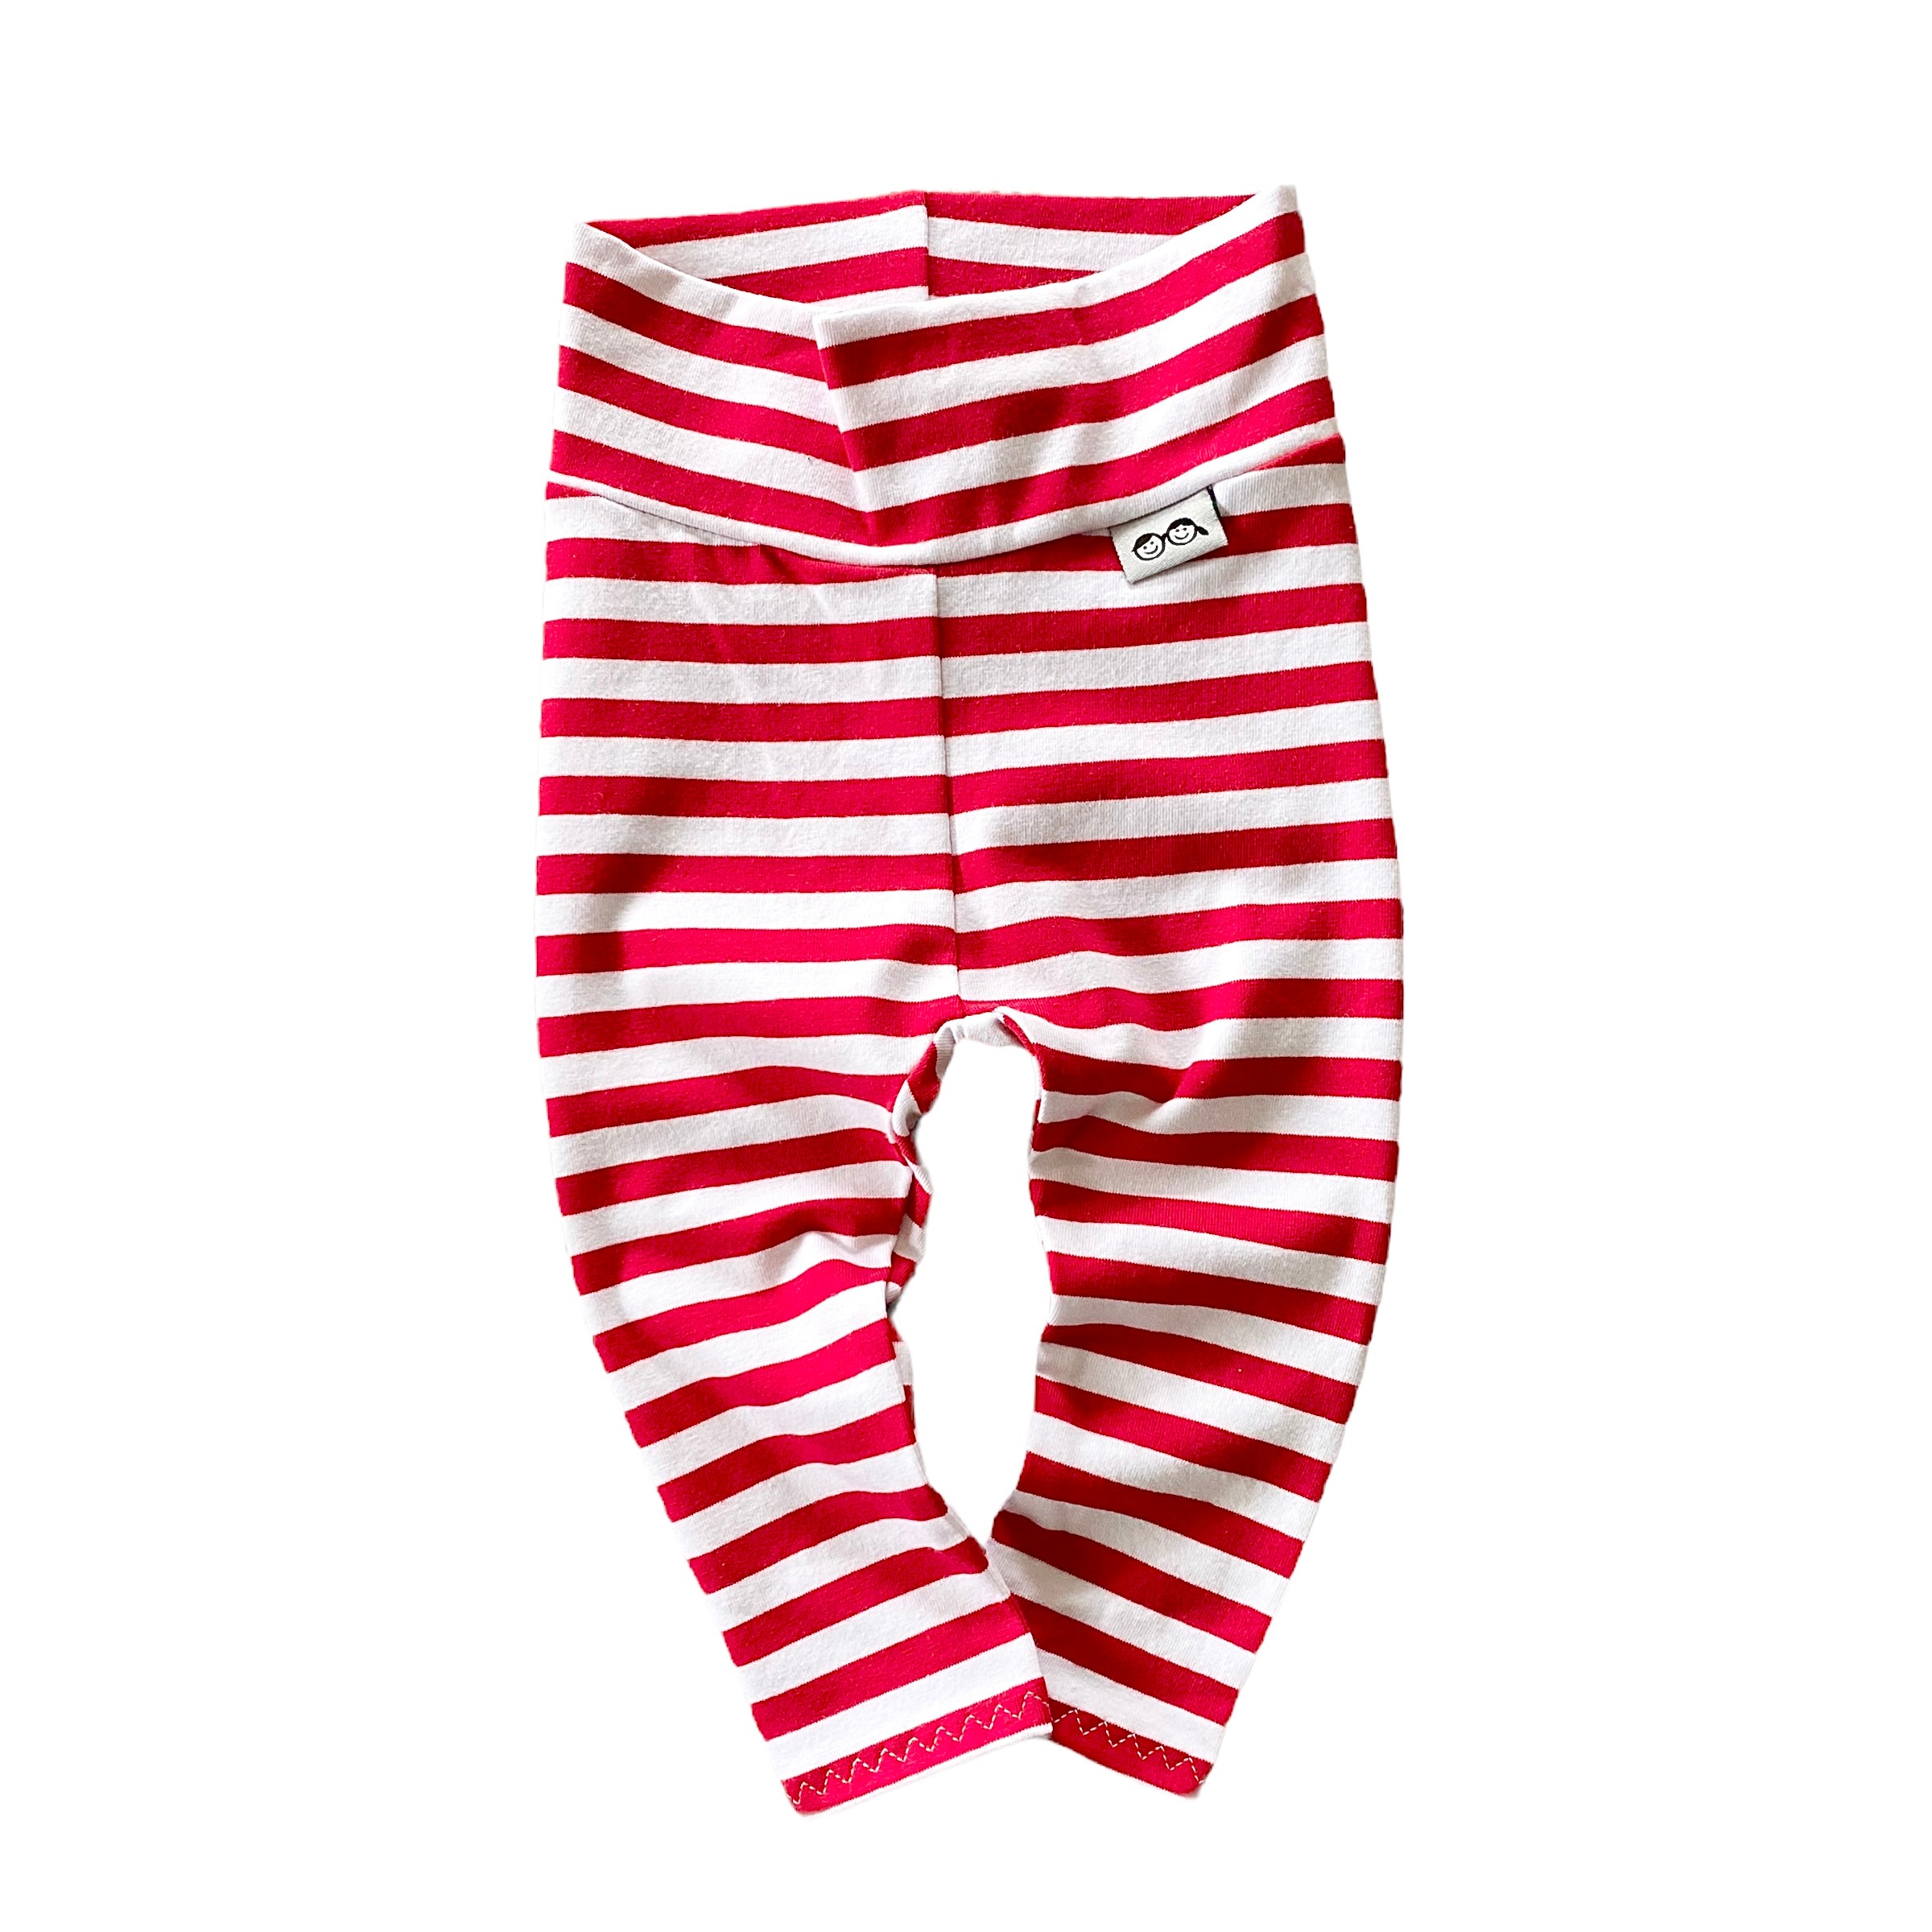 Red and White Striped Leggings and/or Headbands